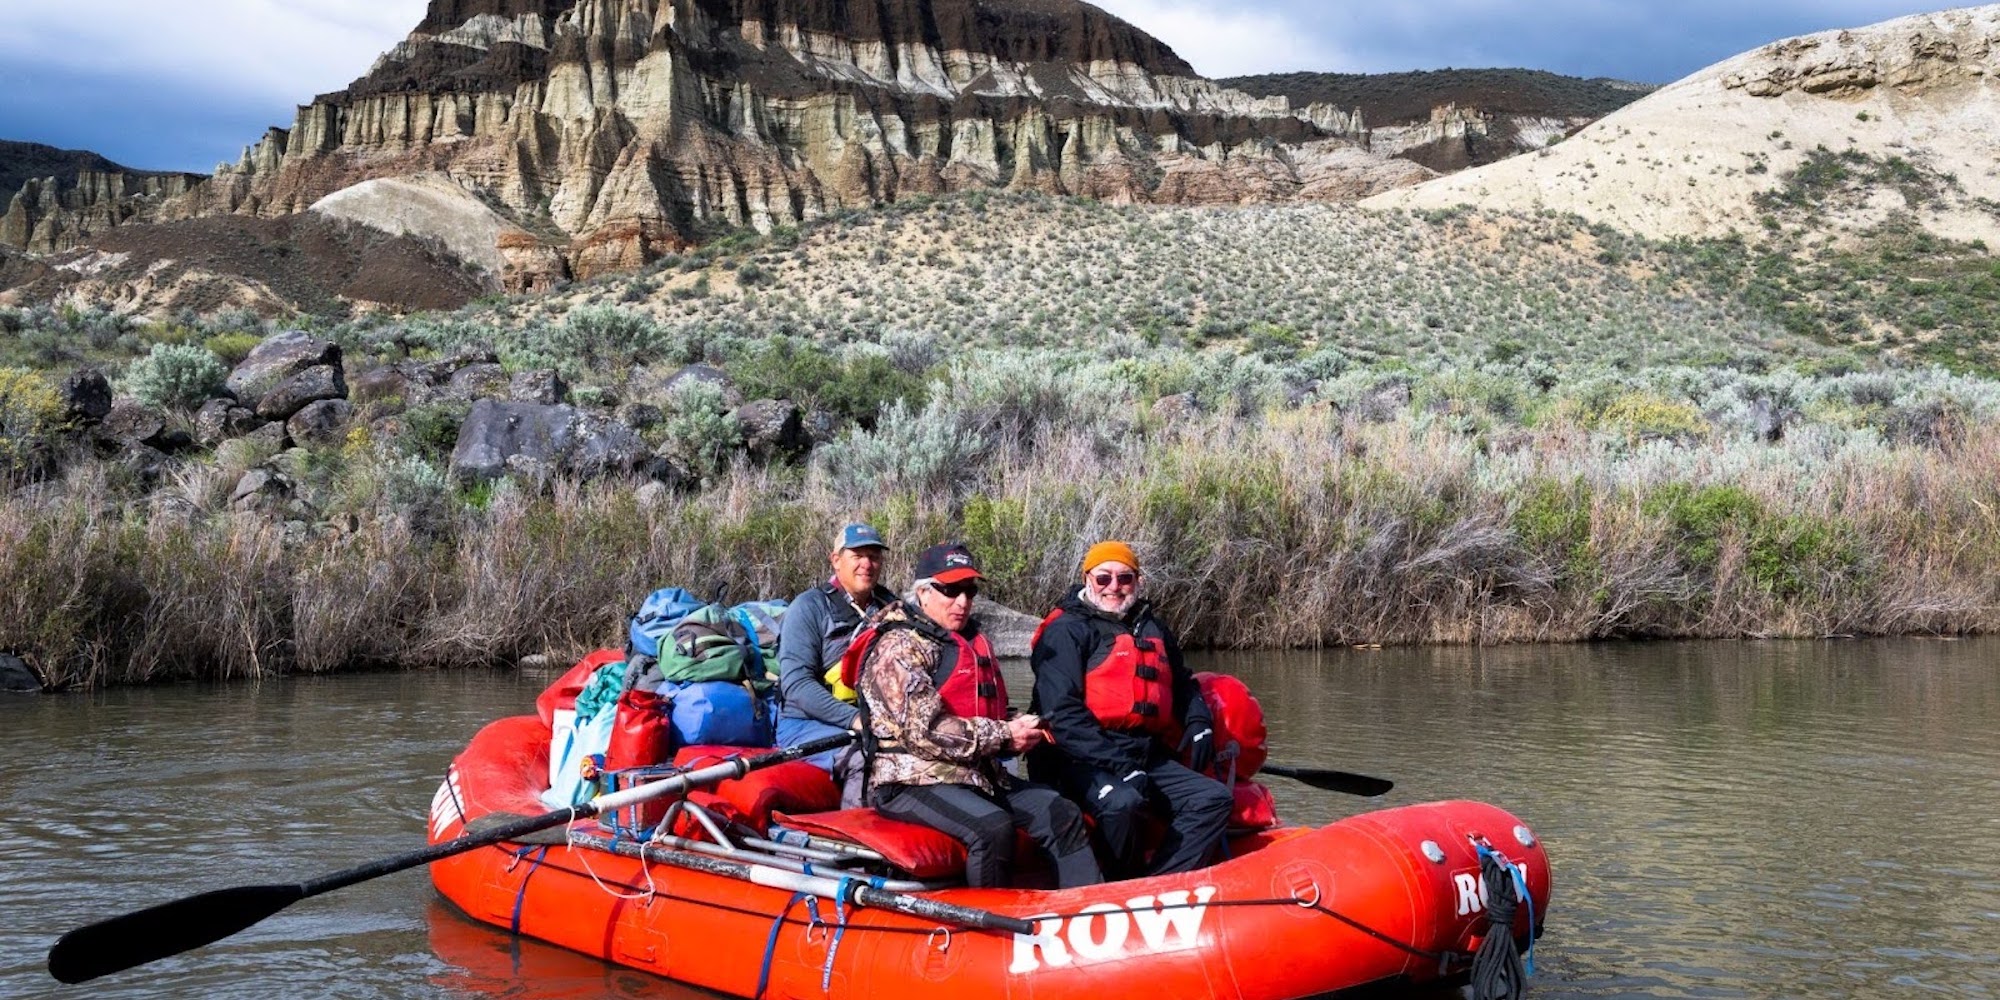 Whitewater rafters posing for a photo on the Owyhee River in front of unique canyon geology